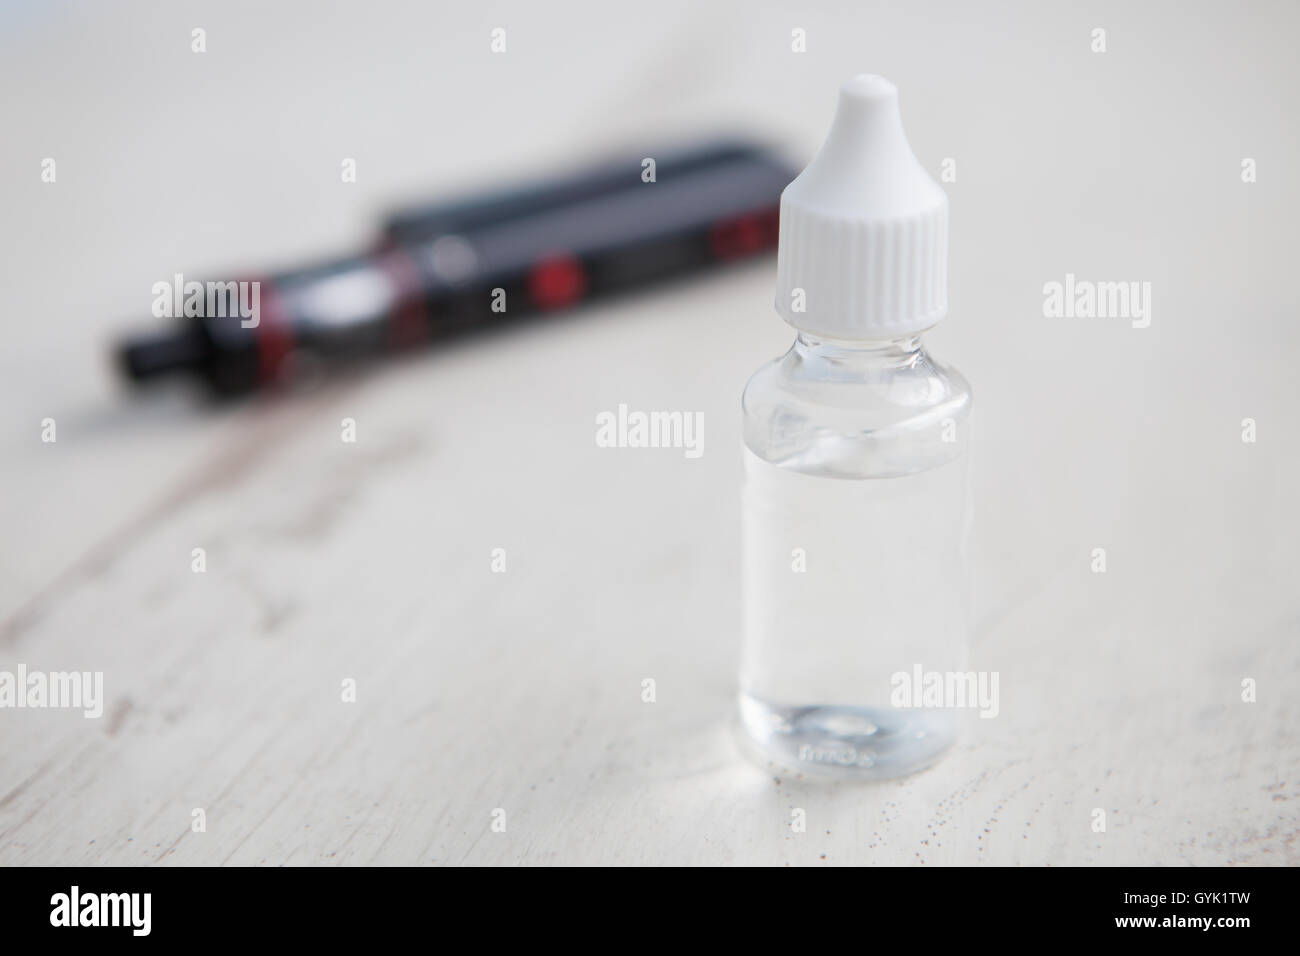 Popular vaping e-liquid filling with tasty fruit or pastry flavour. Vaporizer and refilling e-juice. Refill liquid tobacco with propylen glicol and glycerin base.Place text on transparent bottle. Stock Photo